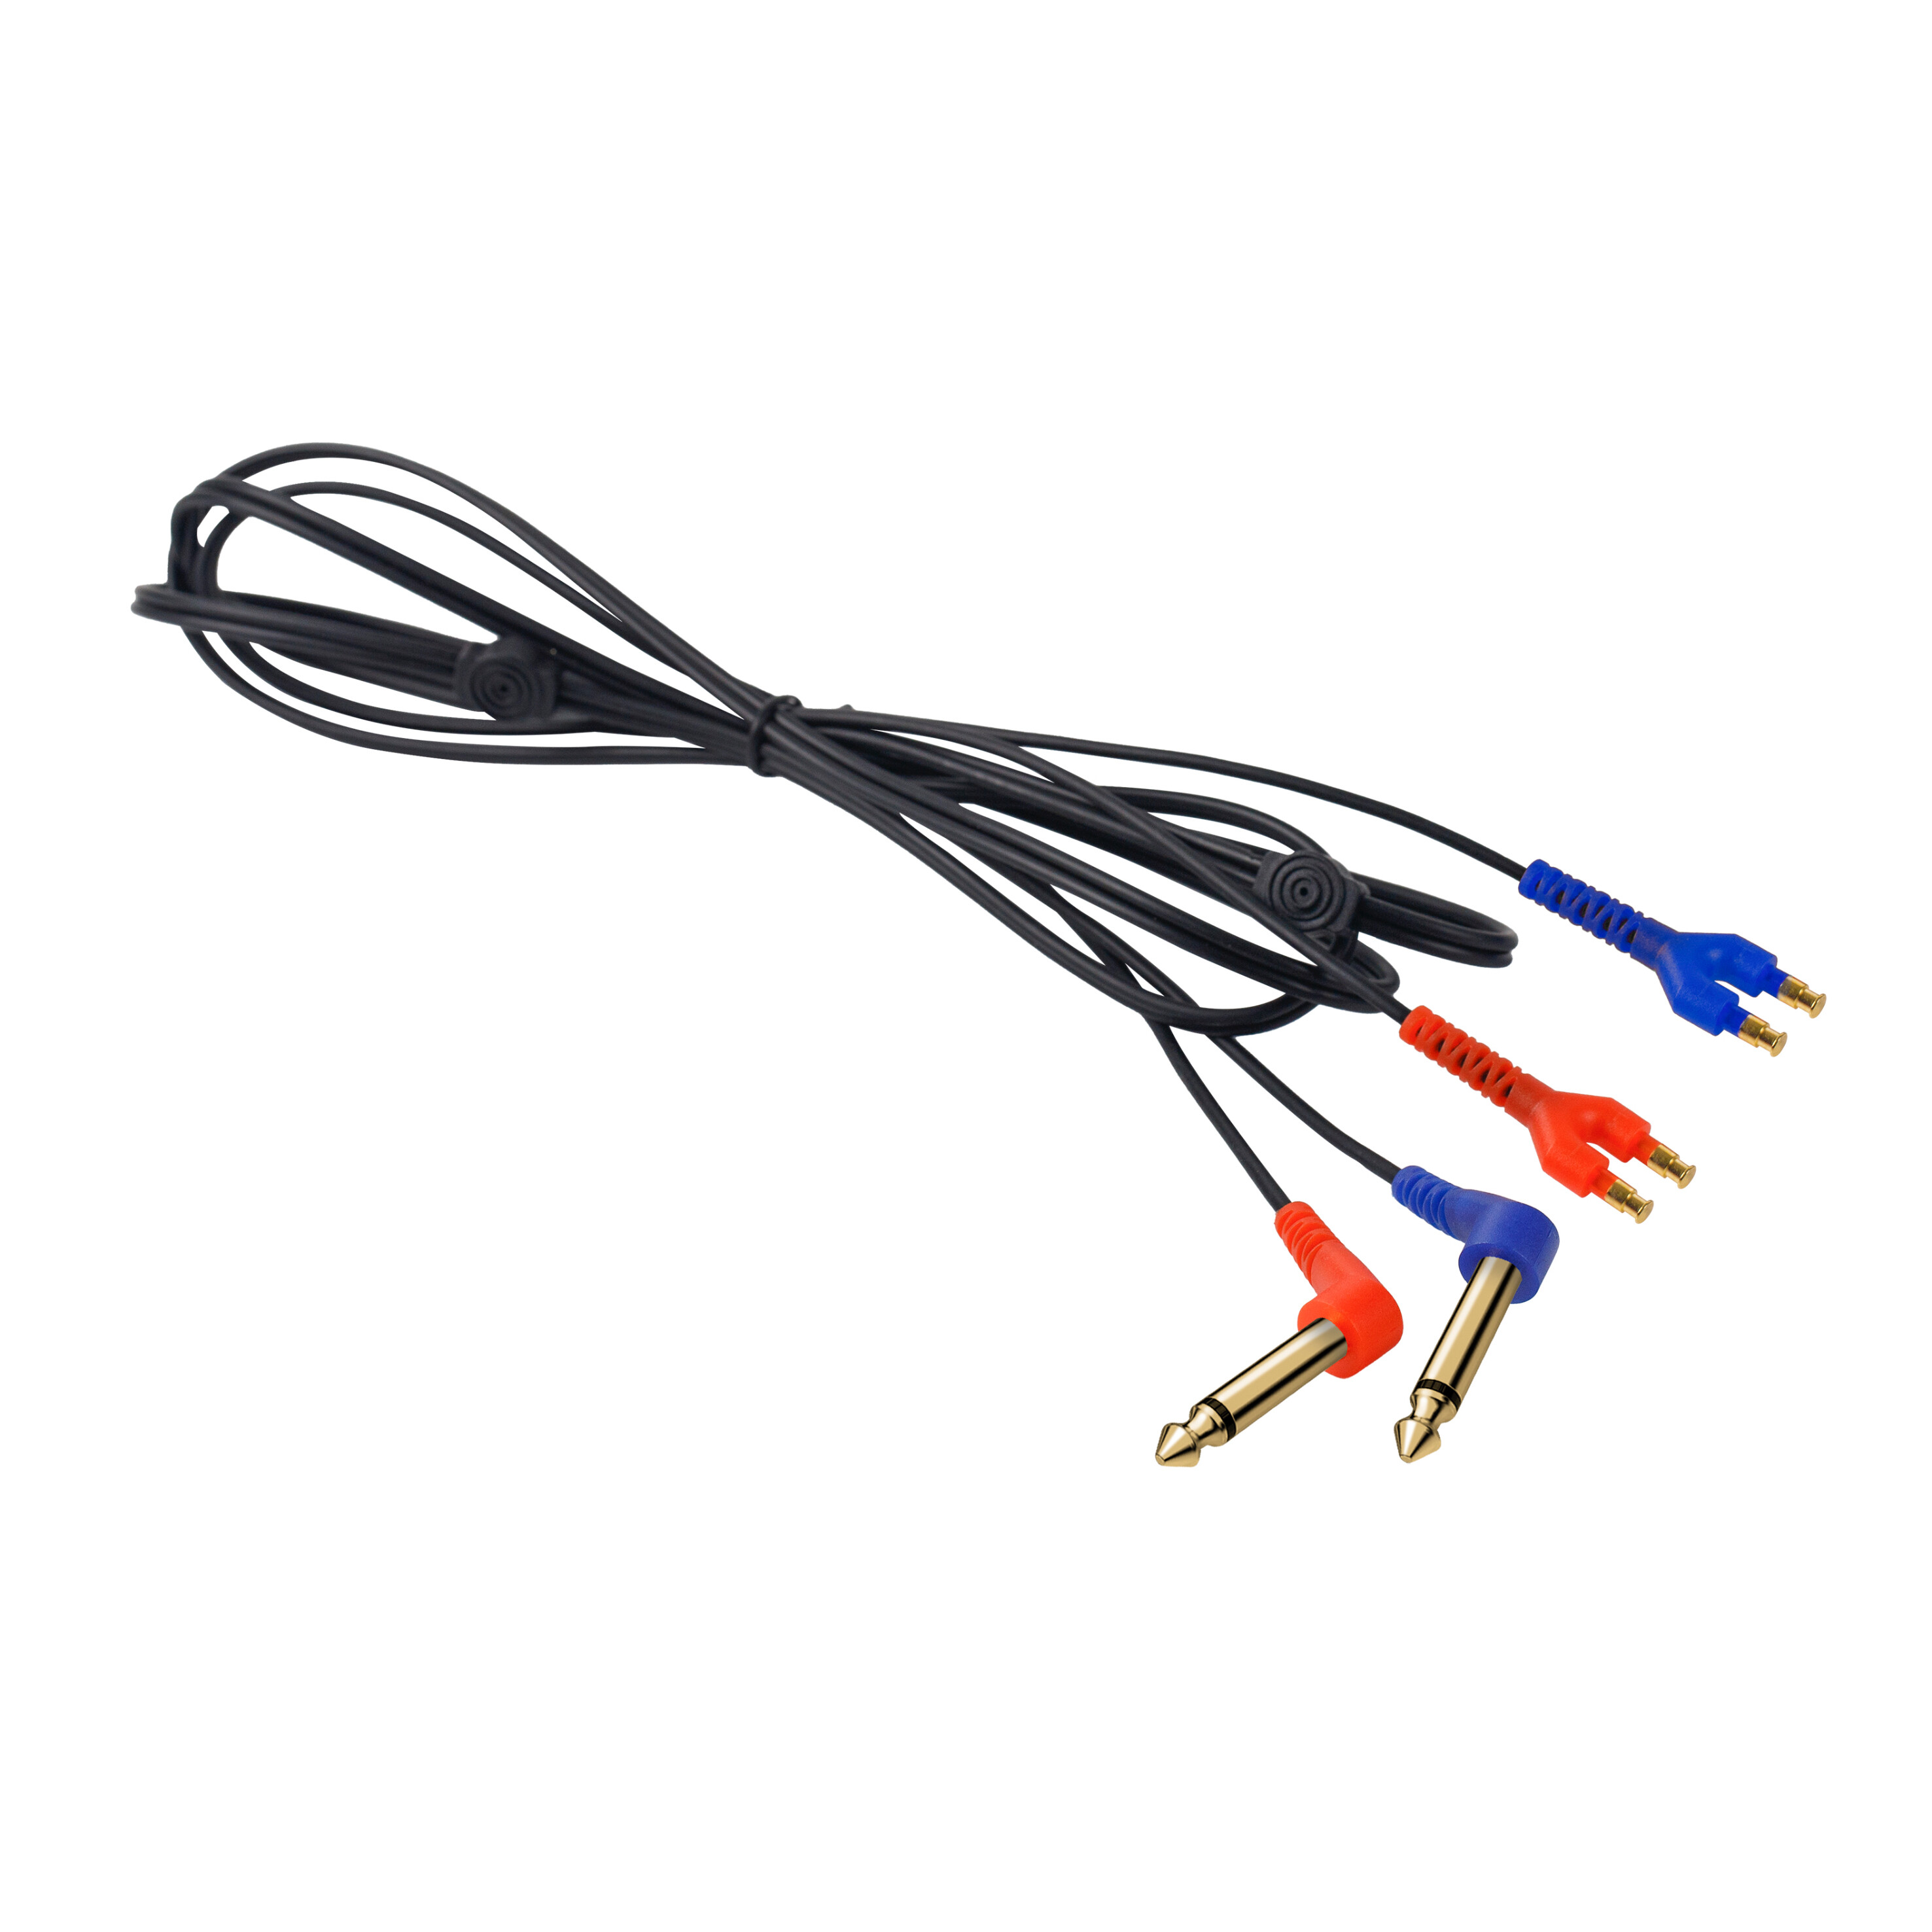 High Quality Audiometer Cable For Connecting Earphone And Audiometer